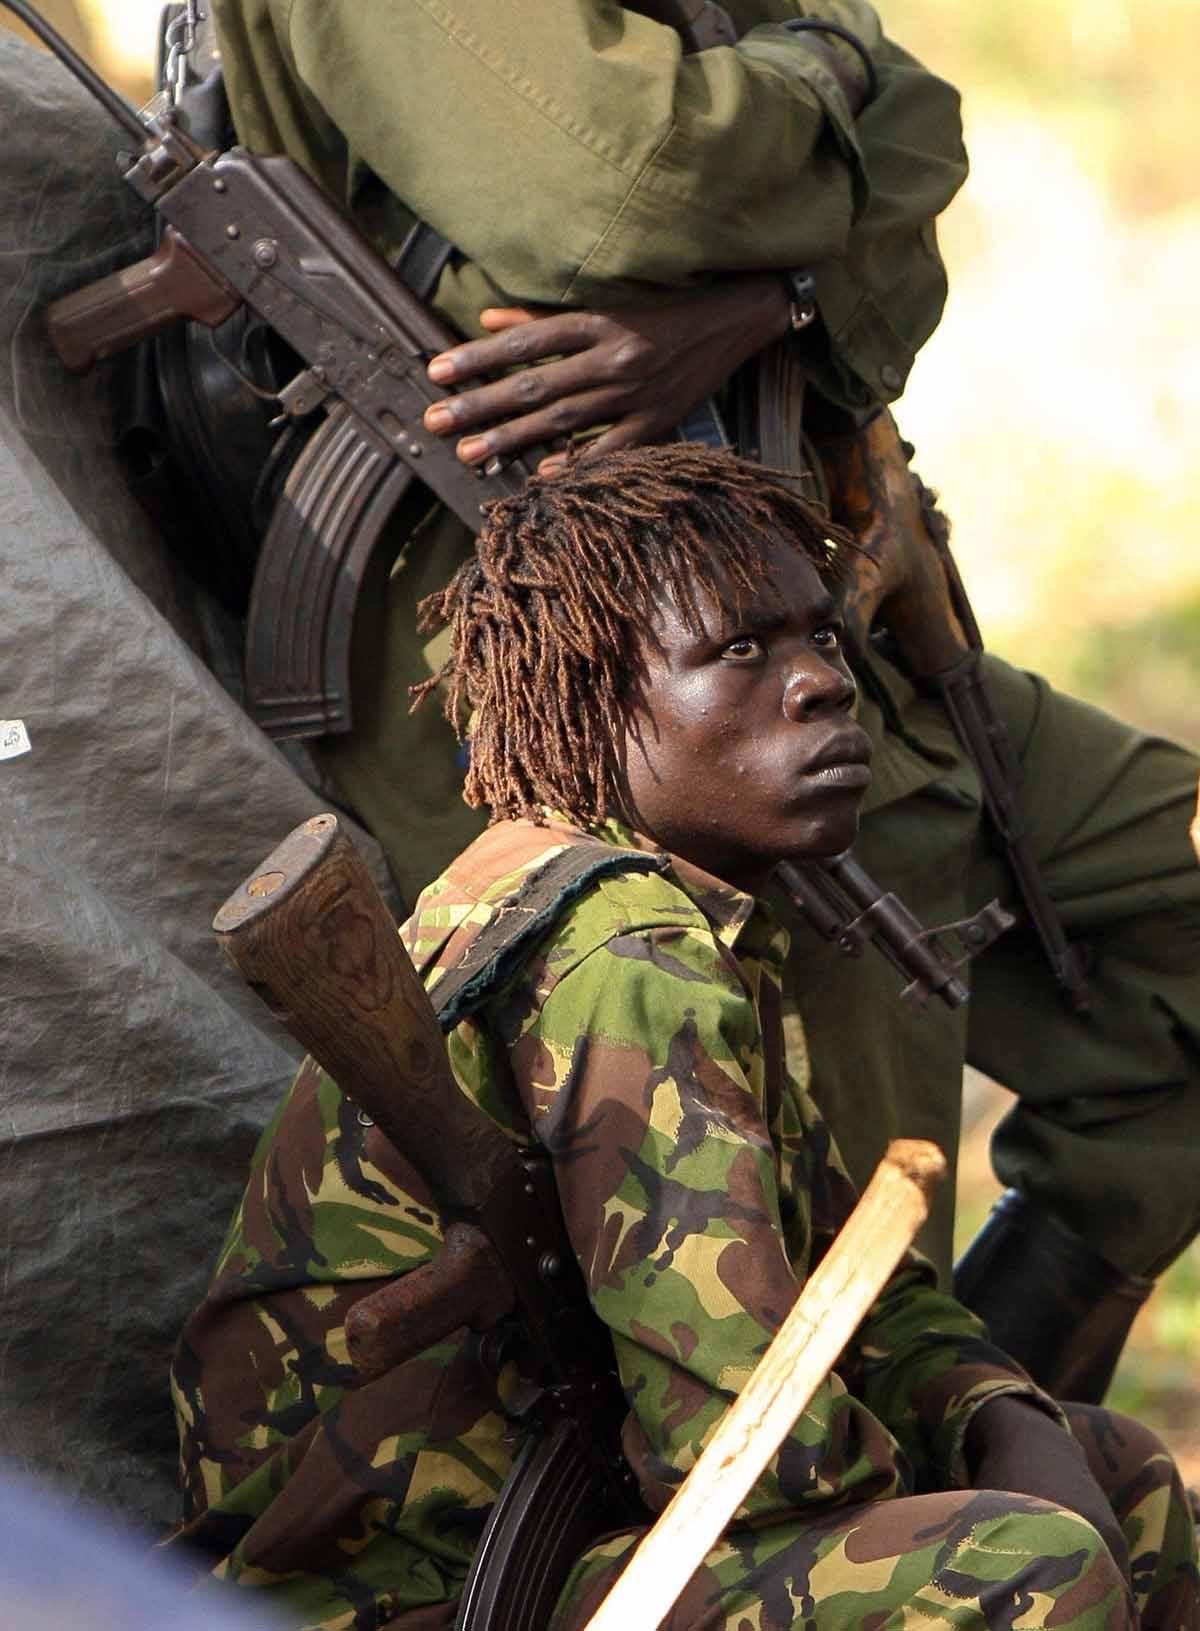 An armed fighter of the Lord's Resistance Army (LRA) looks at a fellow fighter 12 November 2006 during a meeting between the rebel group's leadership and United Nations Emergency Relief coordinator Jan Egeland in Ri-Kwamba, southern Sudan.